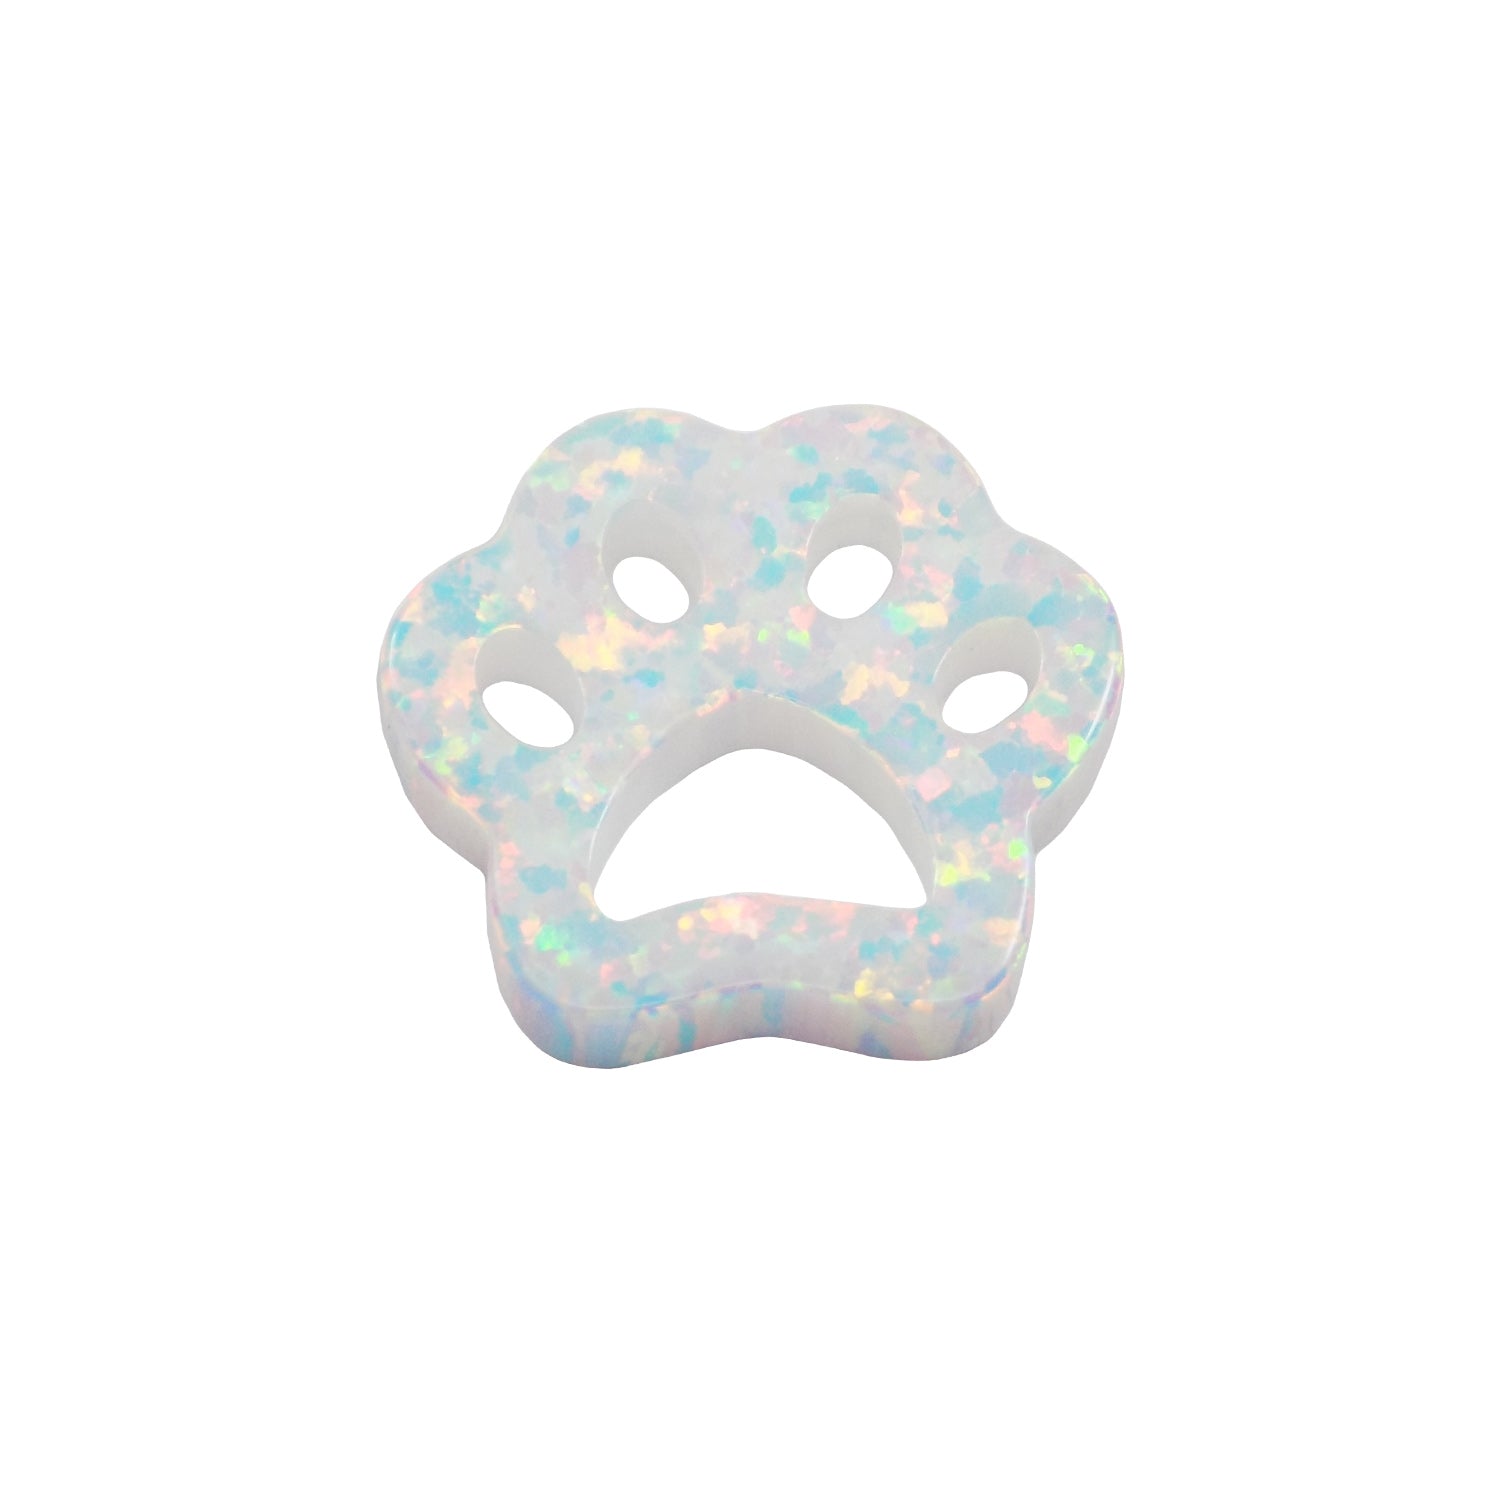 Puppy Dog Paw Opal Charm Size 10.7mm x 12mm. White Created Opal